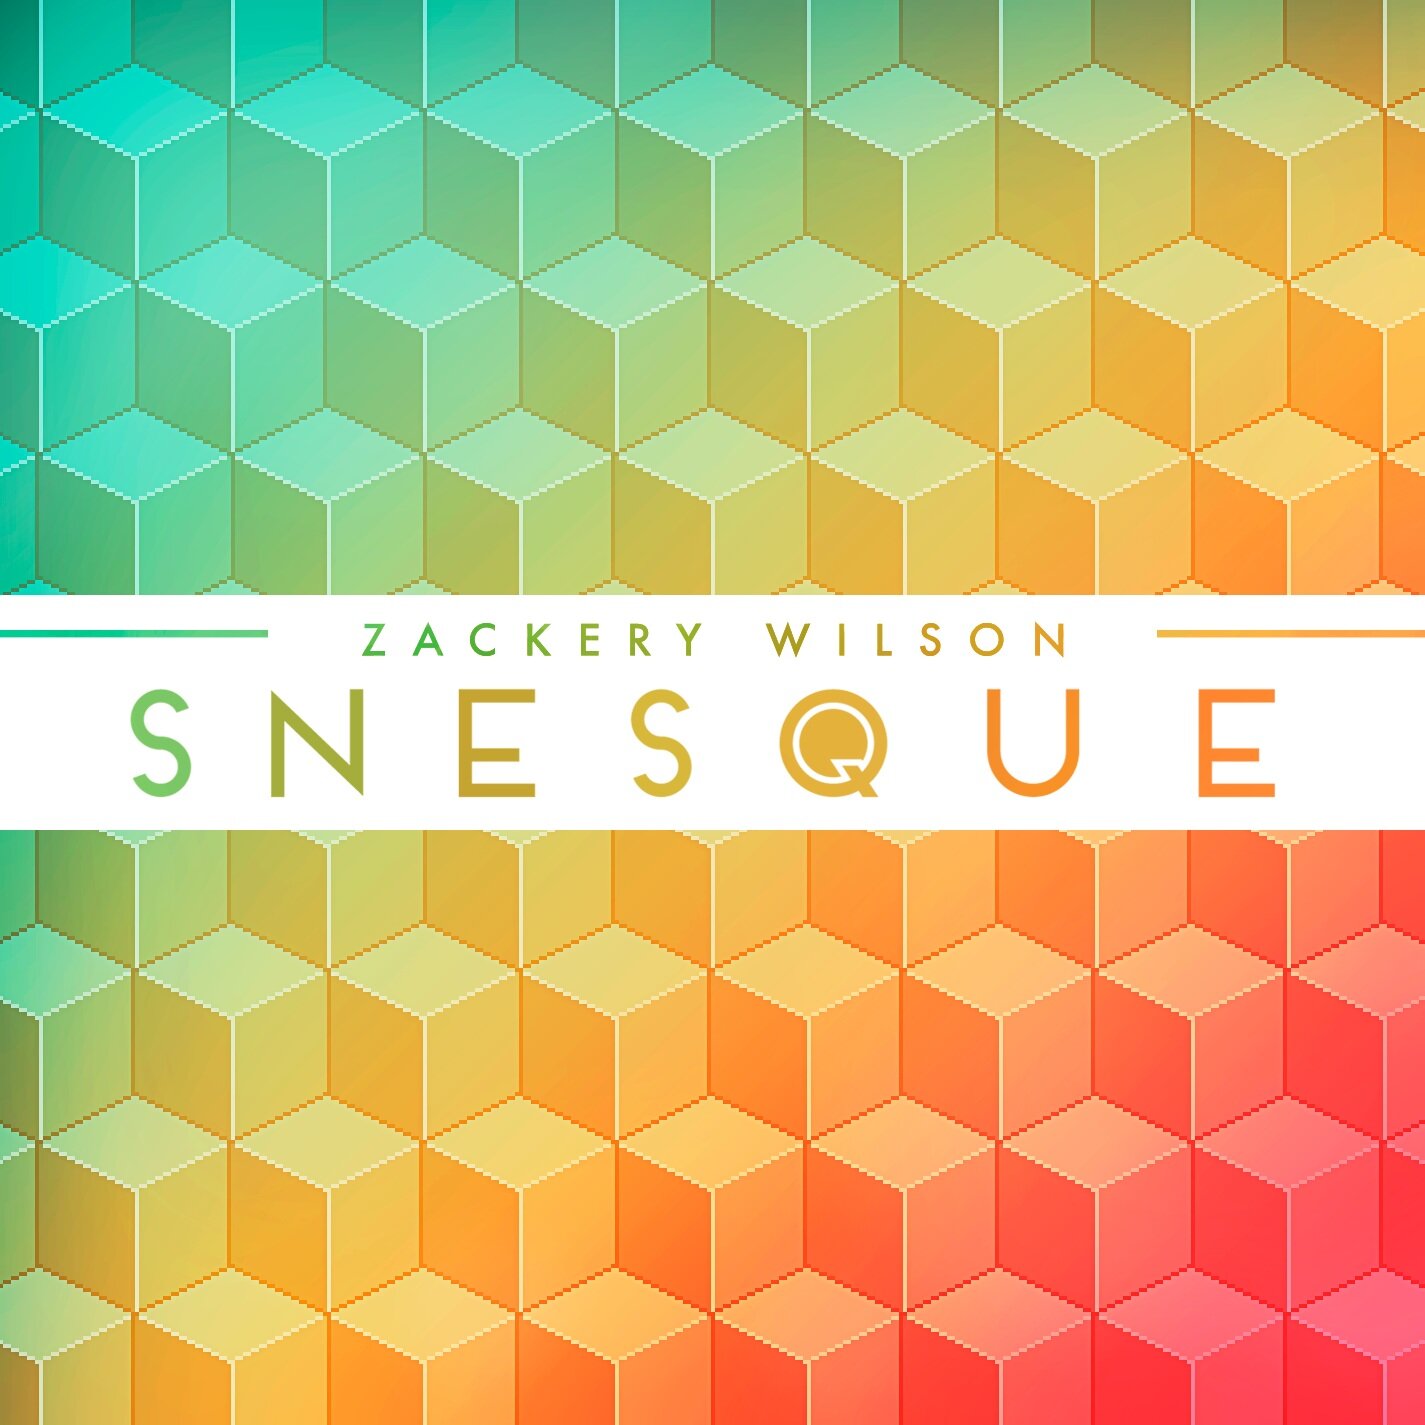 Zackery Wilson - SNESQUE - cover.png